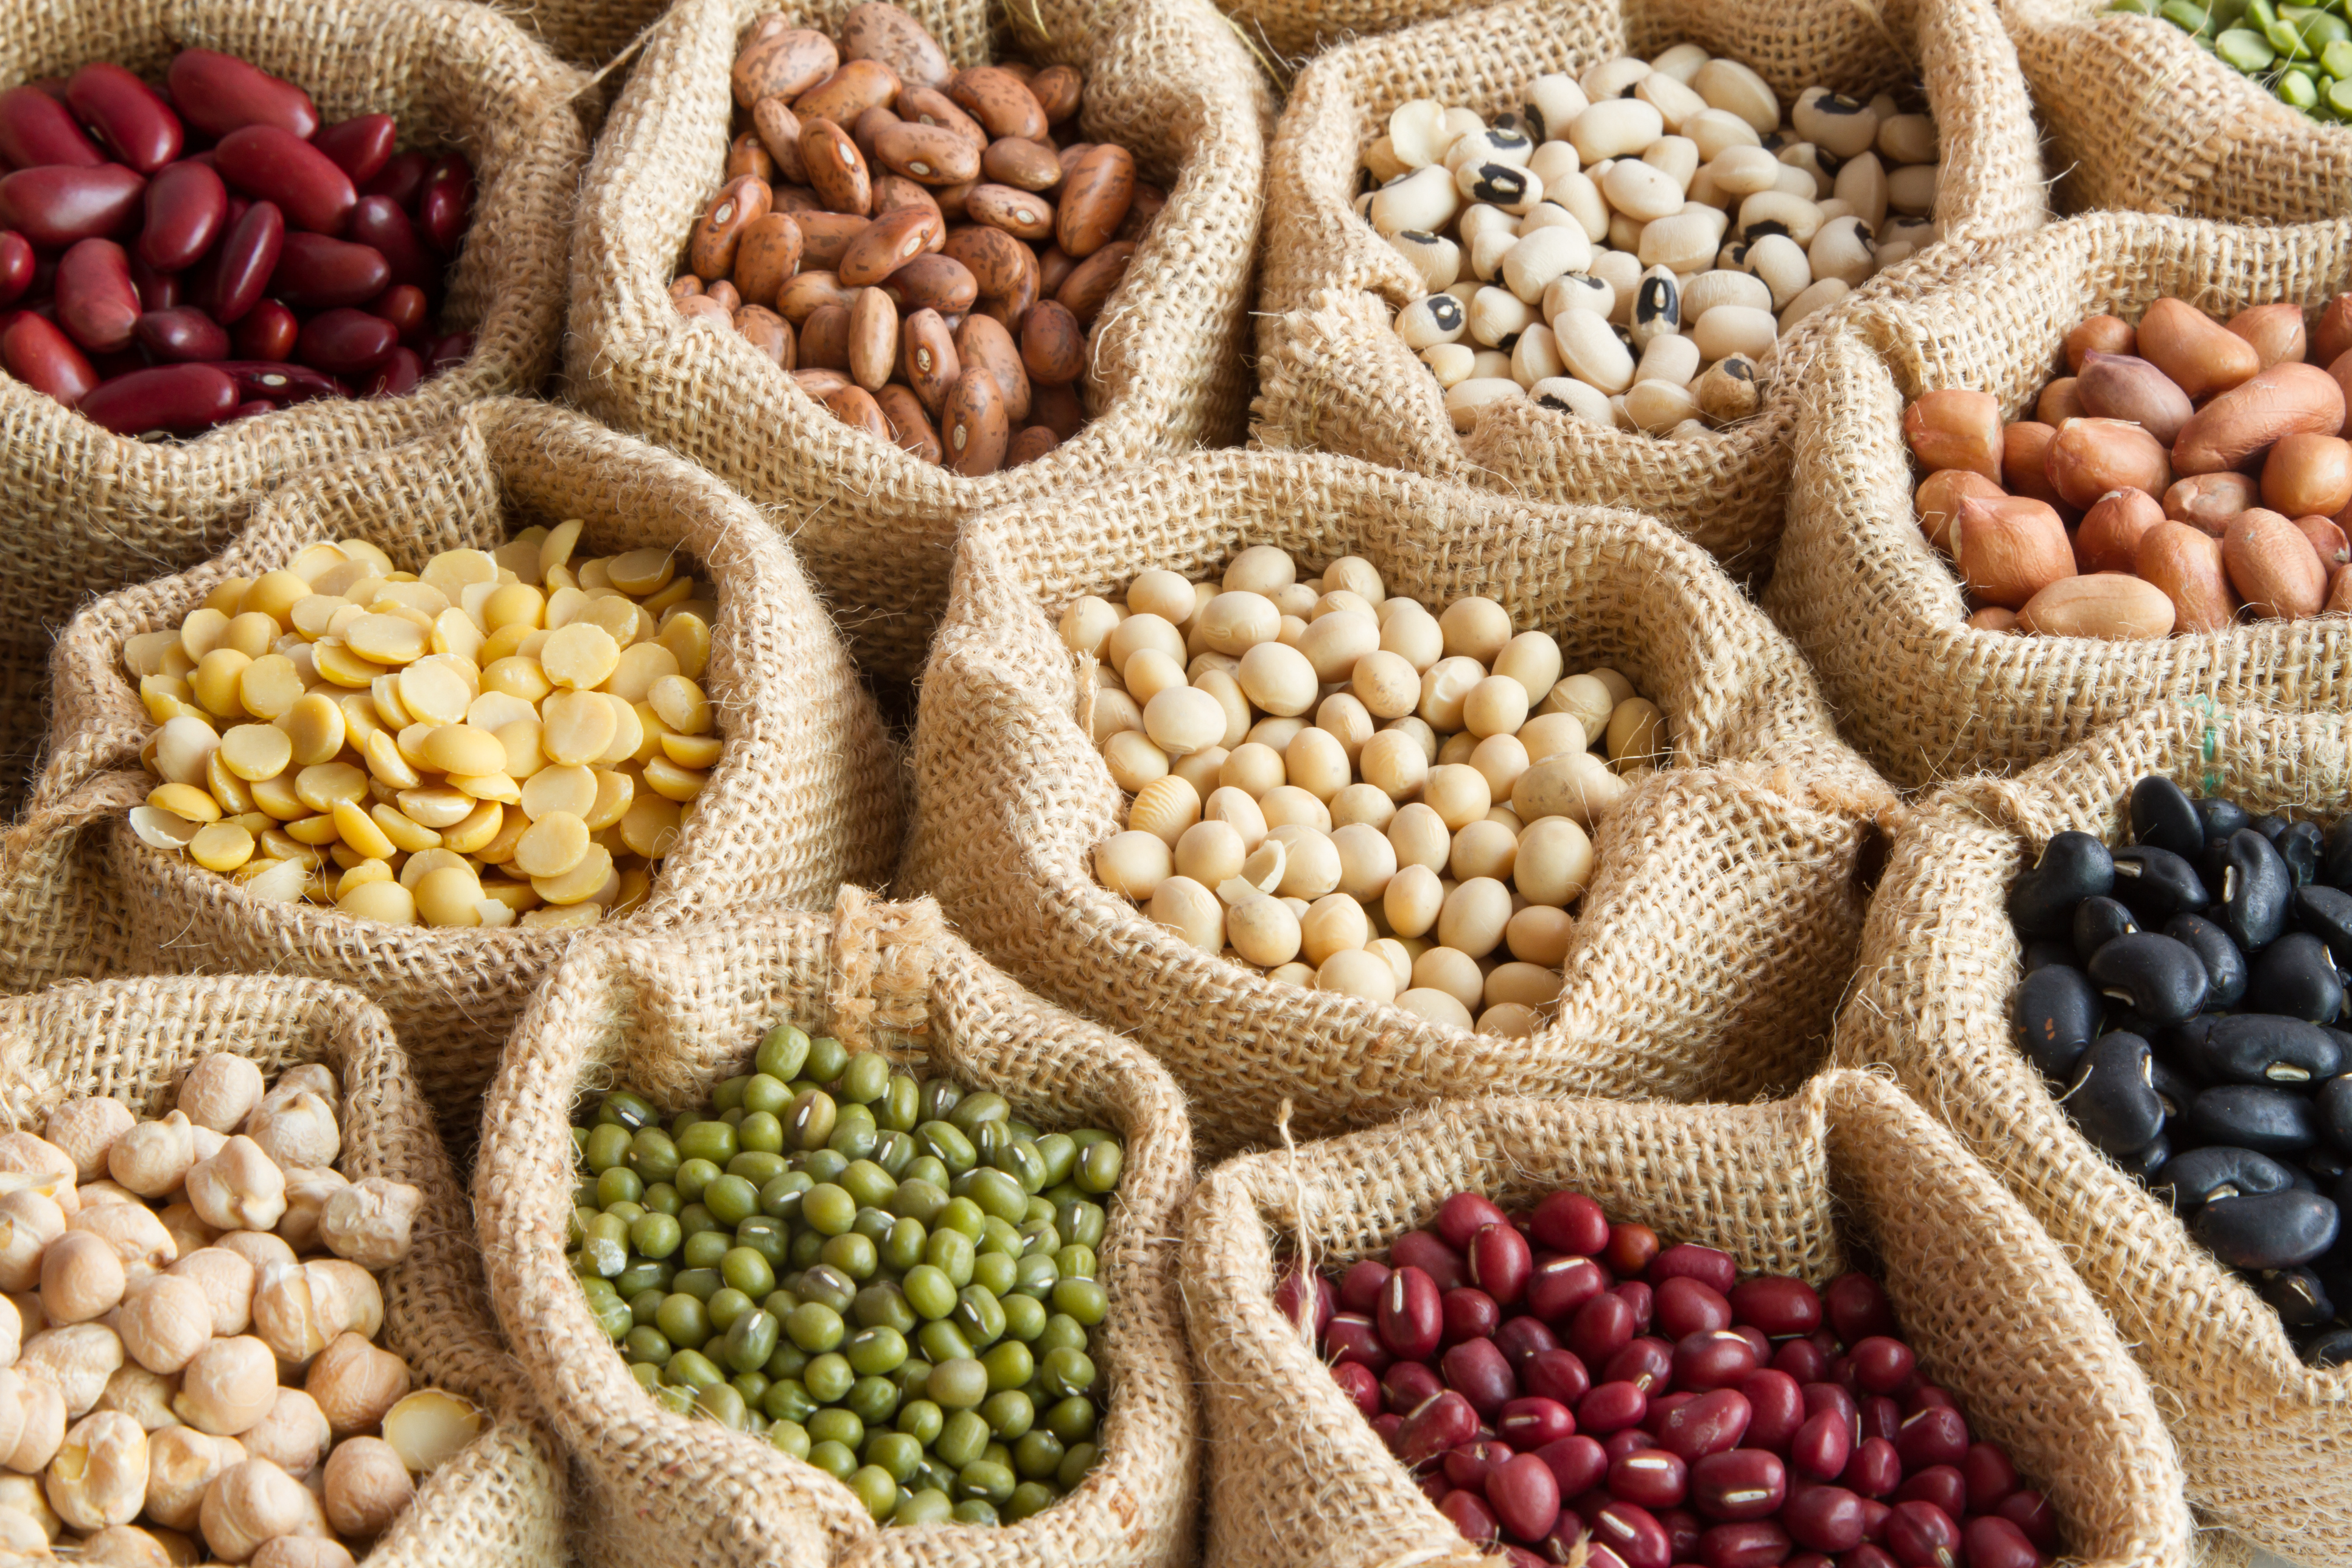 Multiple different kinds of beans in burlap sacks on display at a market.